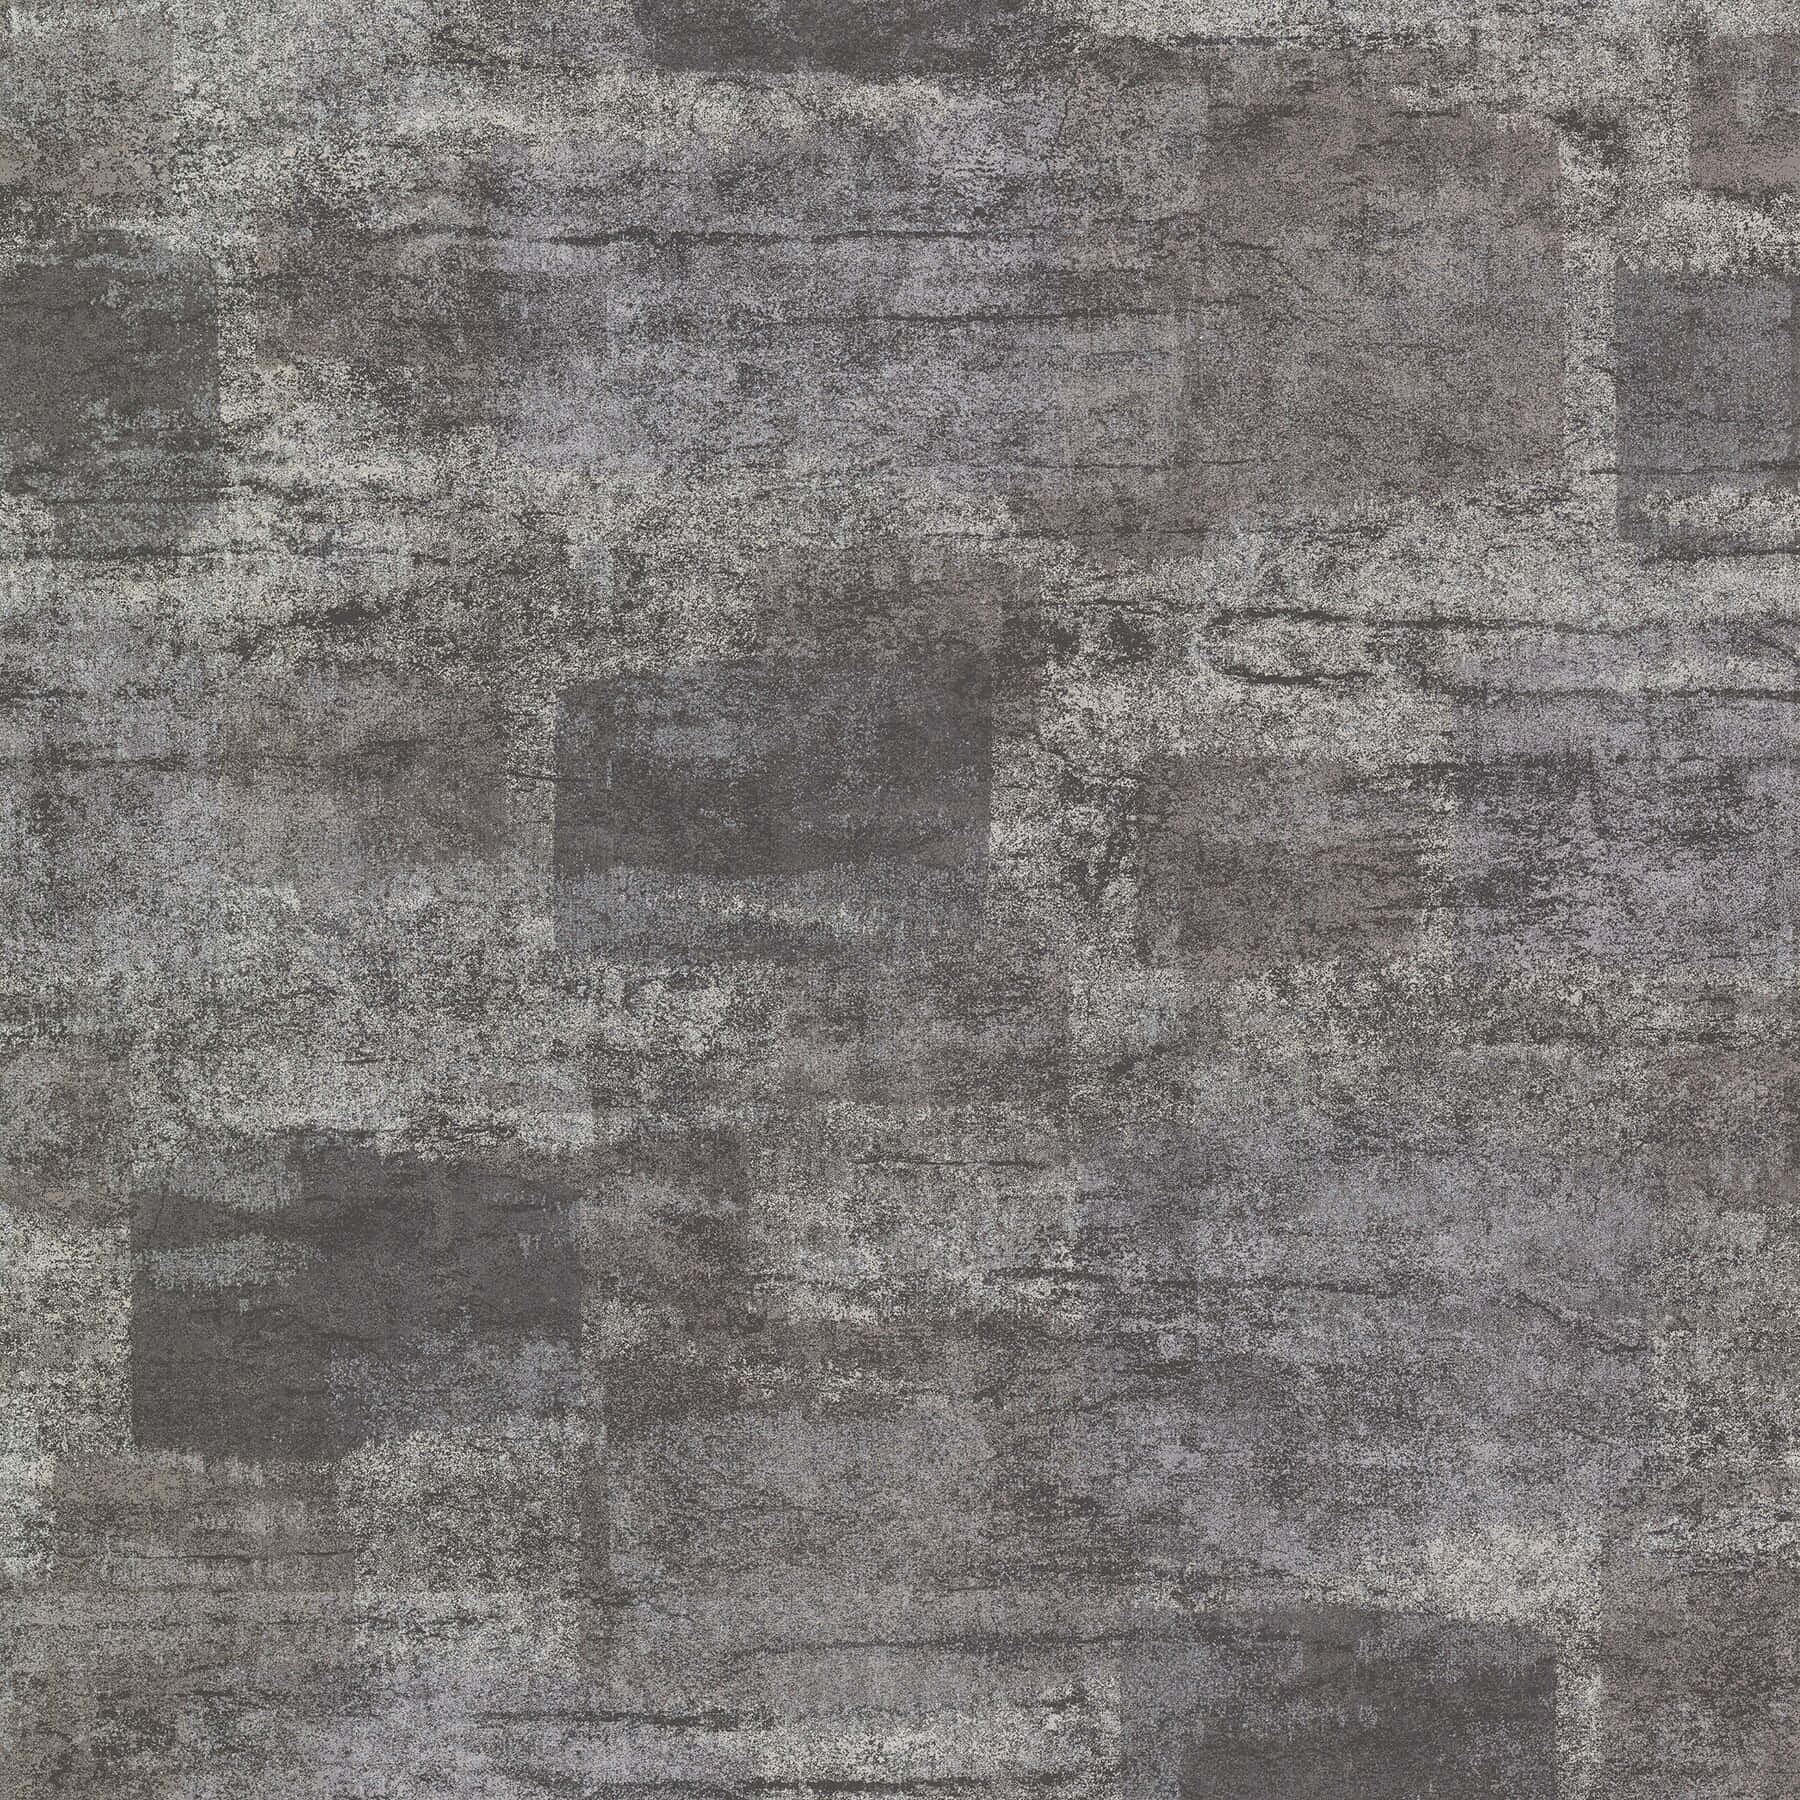 Industrial Textured Distraught Wallpaper